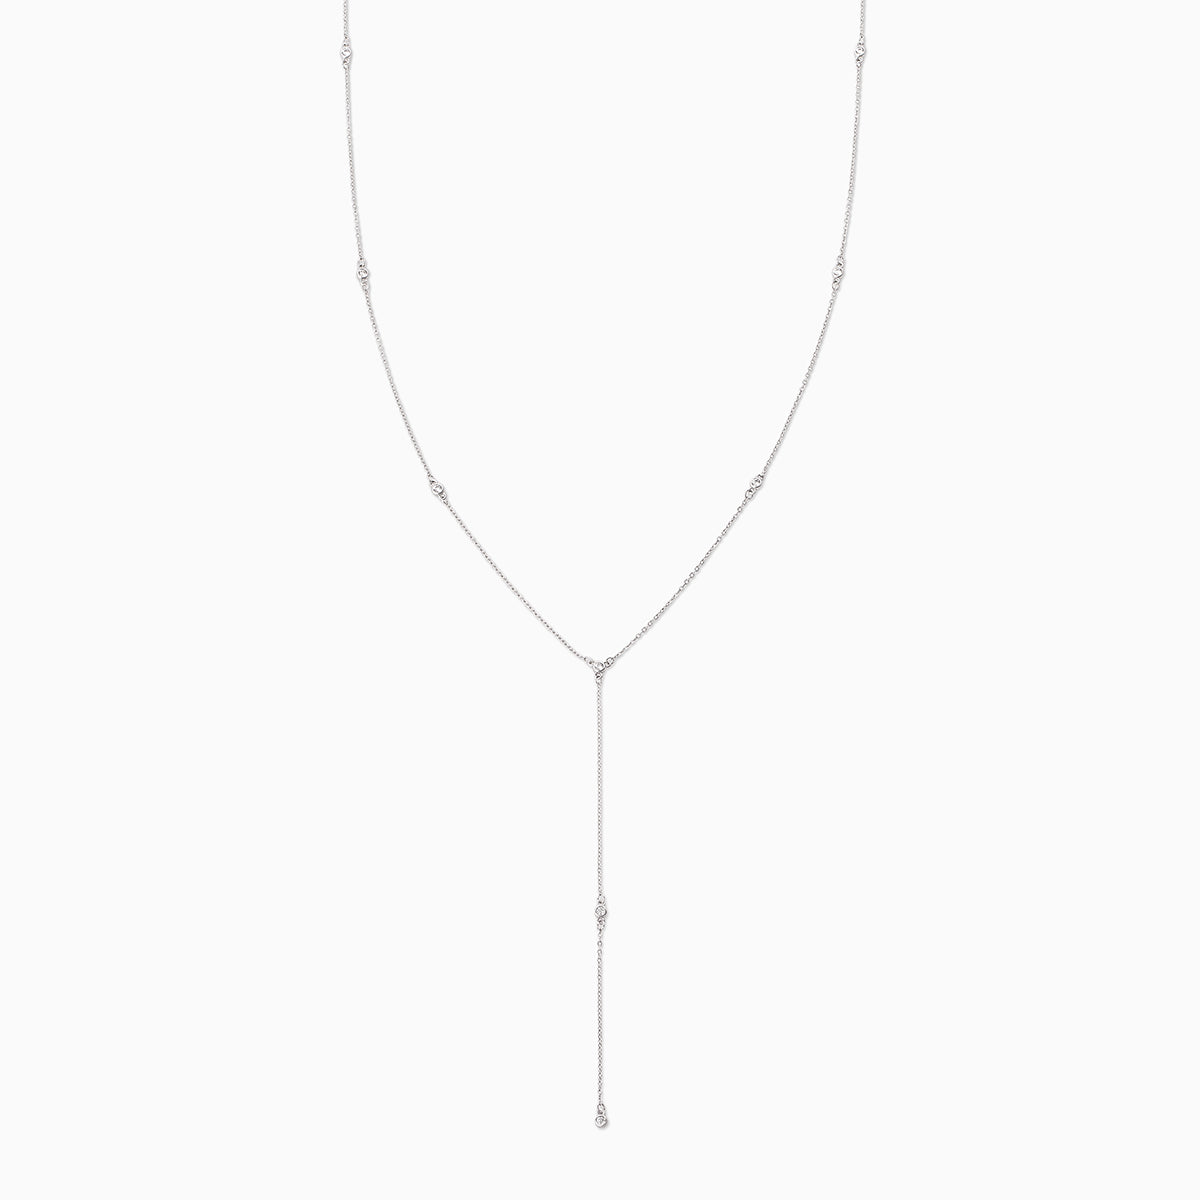 Icy Lariat Necklace | Silver | Product Image | Uncommon James